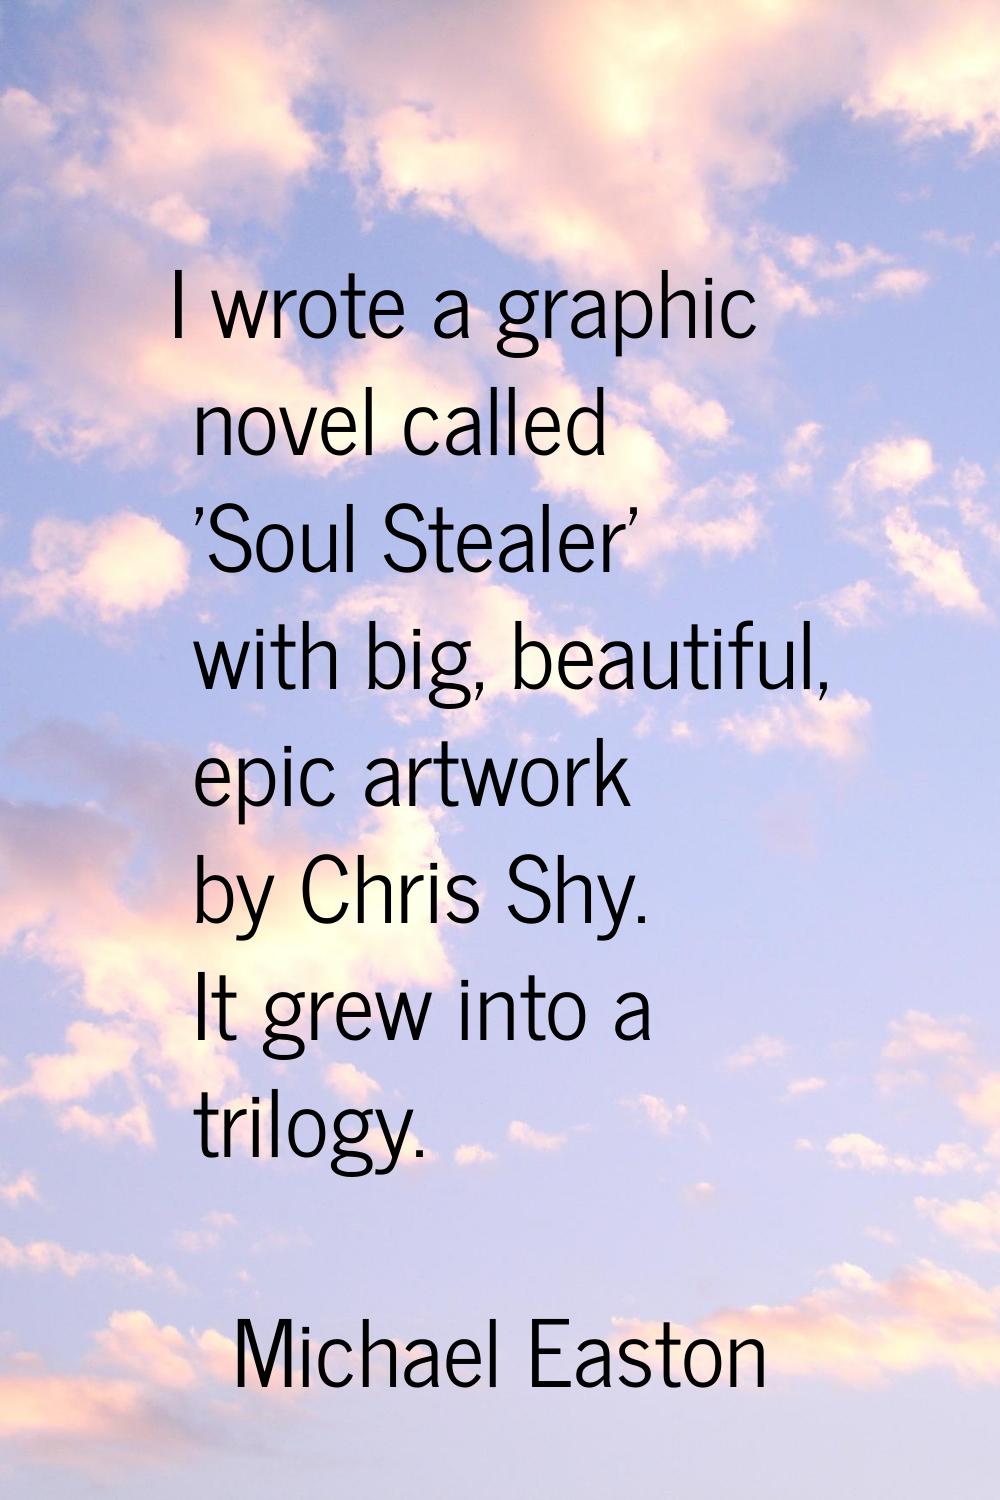 I wrote a graphic novel called 'Soul Stealer' with big, beautiful, epic artwork by Chris Shy. It gr